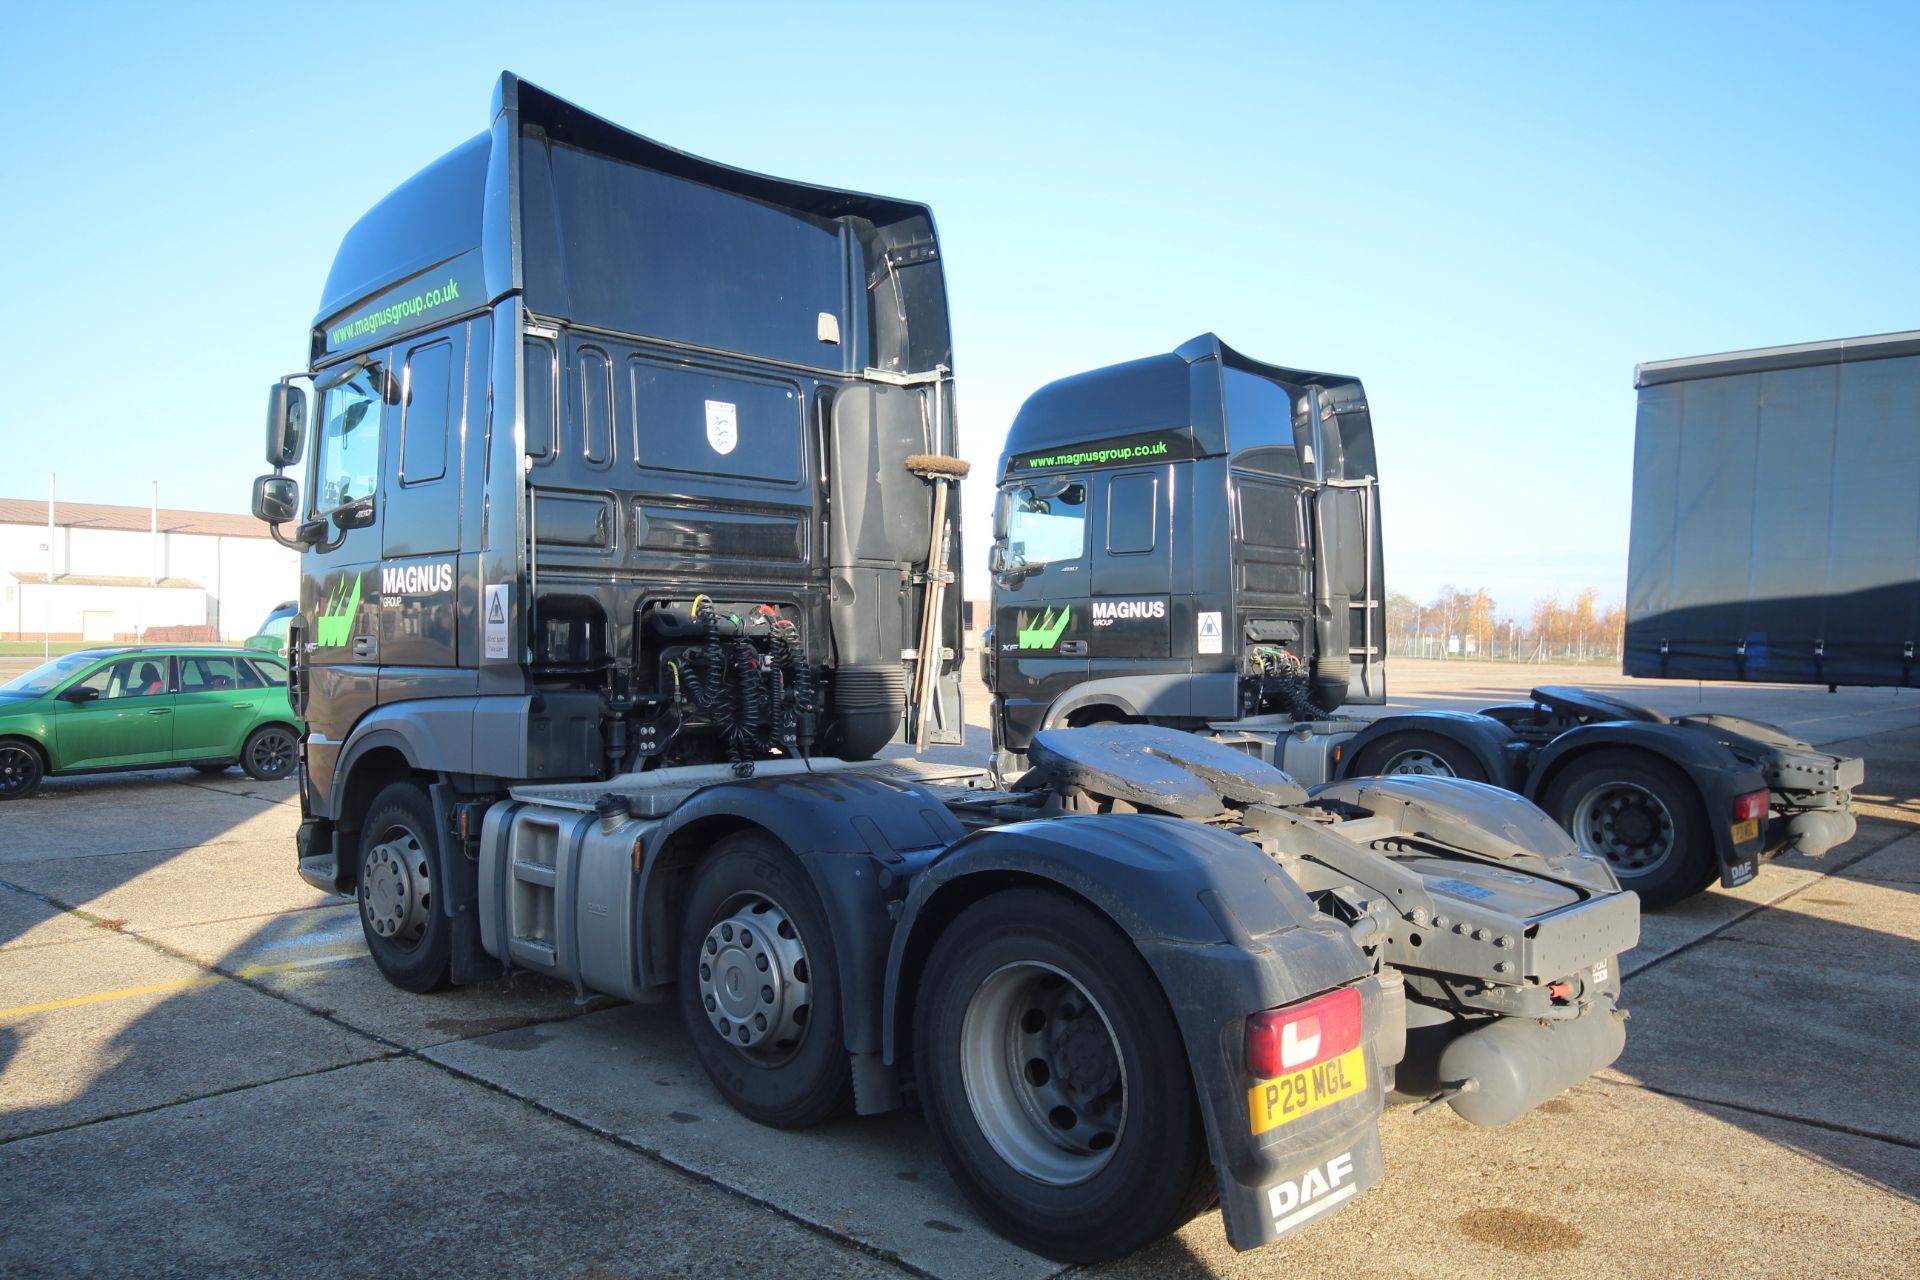 DAF XF 480 FTG 6X2 Euro 6D auto mid-lift and steer 44T unit. Registration P29 MGL. Date of first - Image 2 of 116